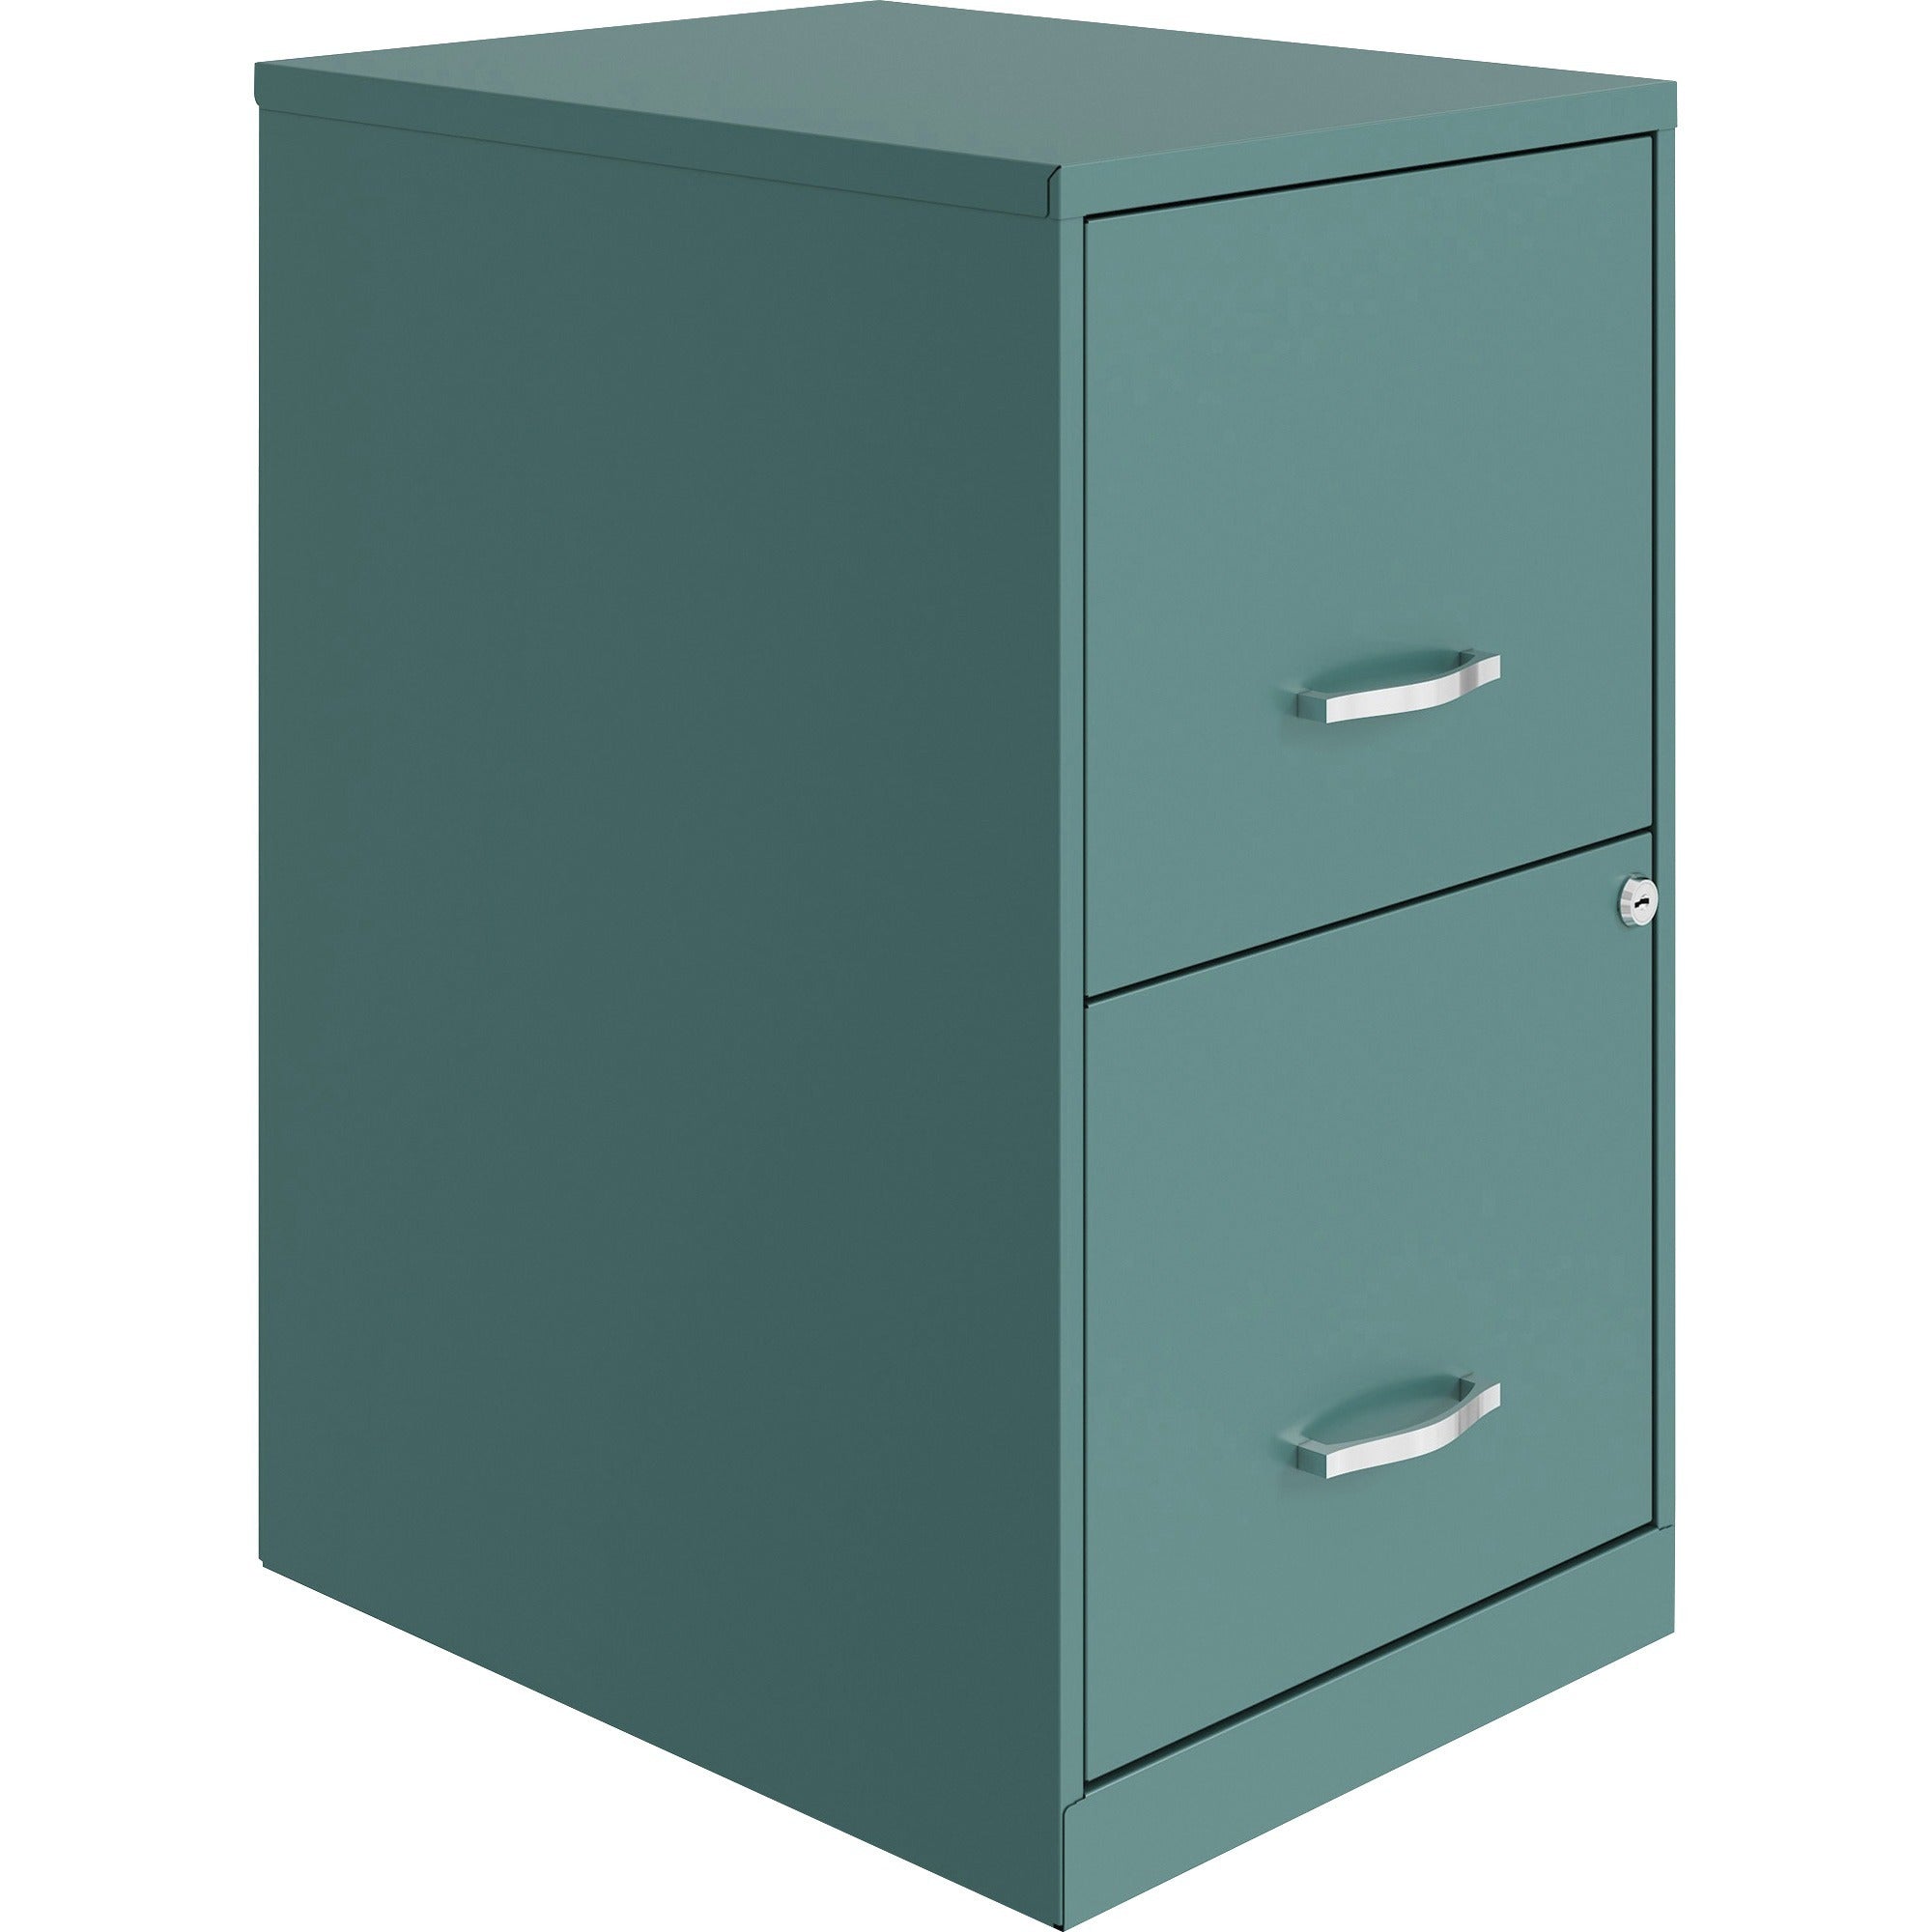 nusparc-file-cabinet-142-x-18-x-245-2-x-drawers-for-file-letter-vertical-locking-drawer-glide-suspension-nonporous-surface-teal-baked-enamel-steel-recycled_nprvf218aatl - 1